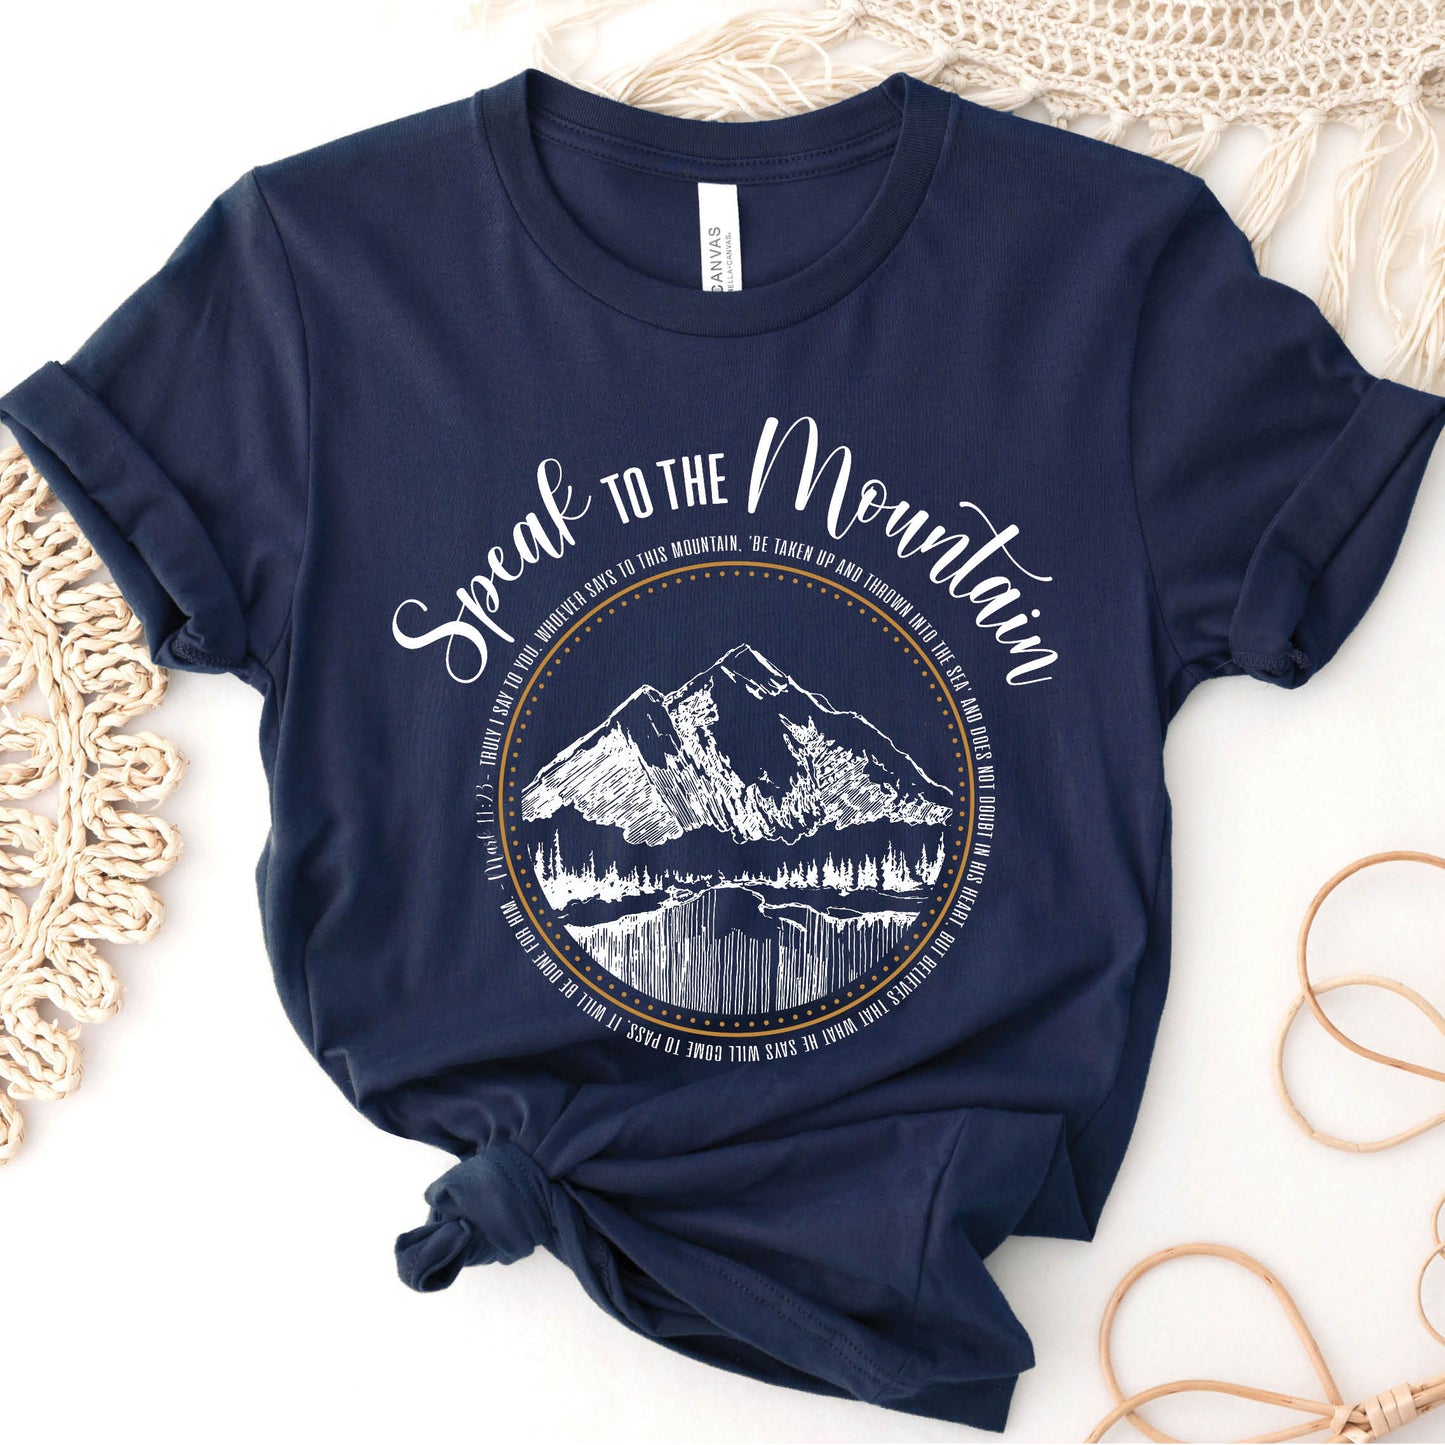 Navy Blue Speak to the Mountain Christian unisex graphic t-shirt with Mark 11:23 Whosoever Believes scripture faith-based tee, designed for women